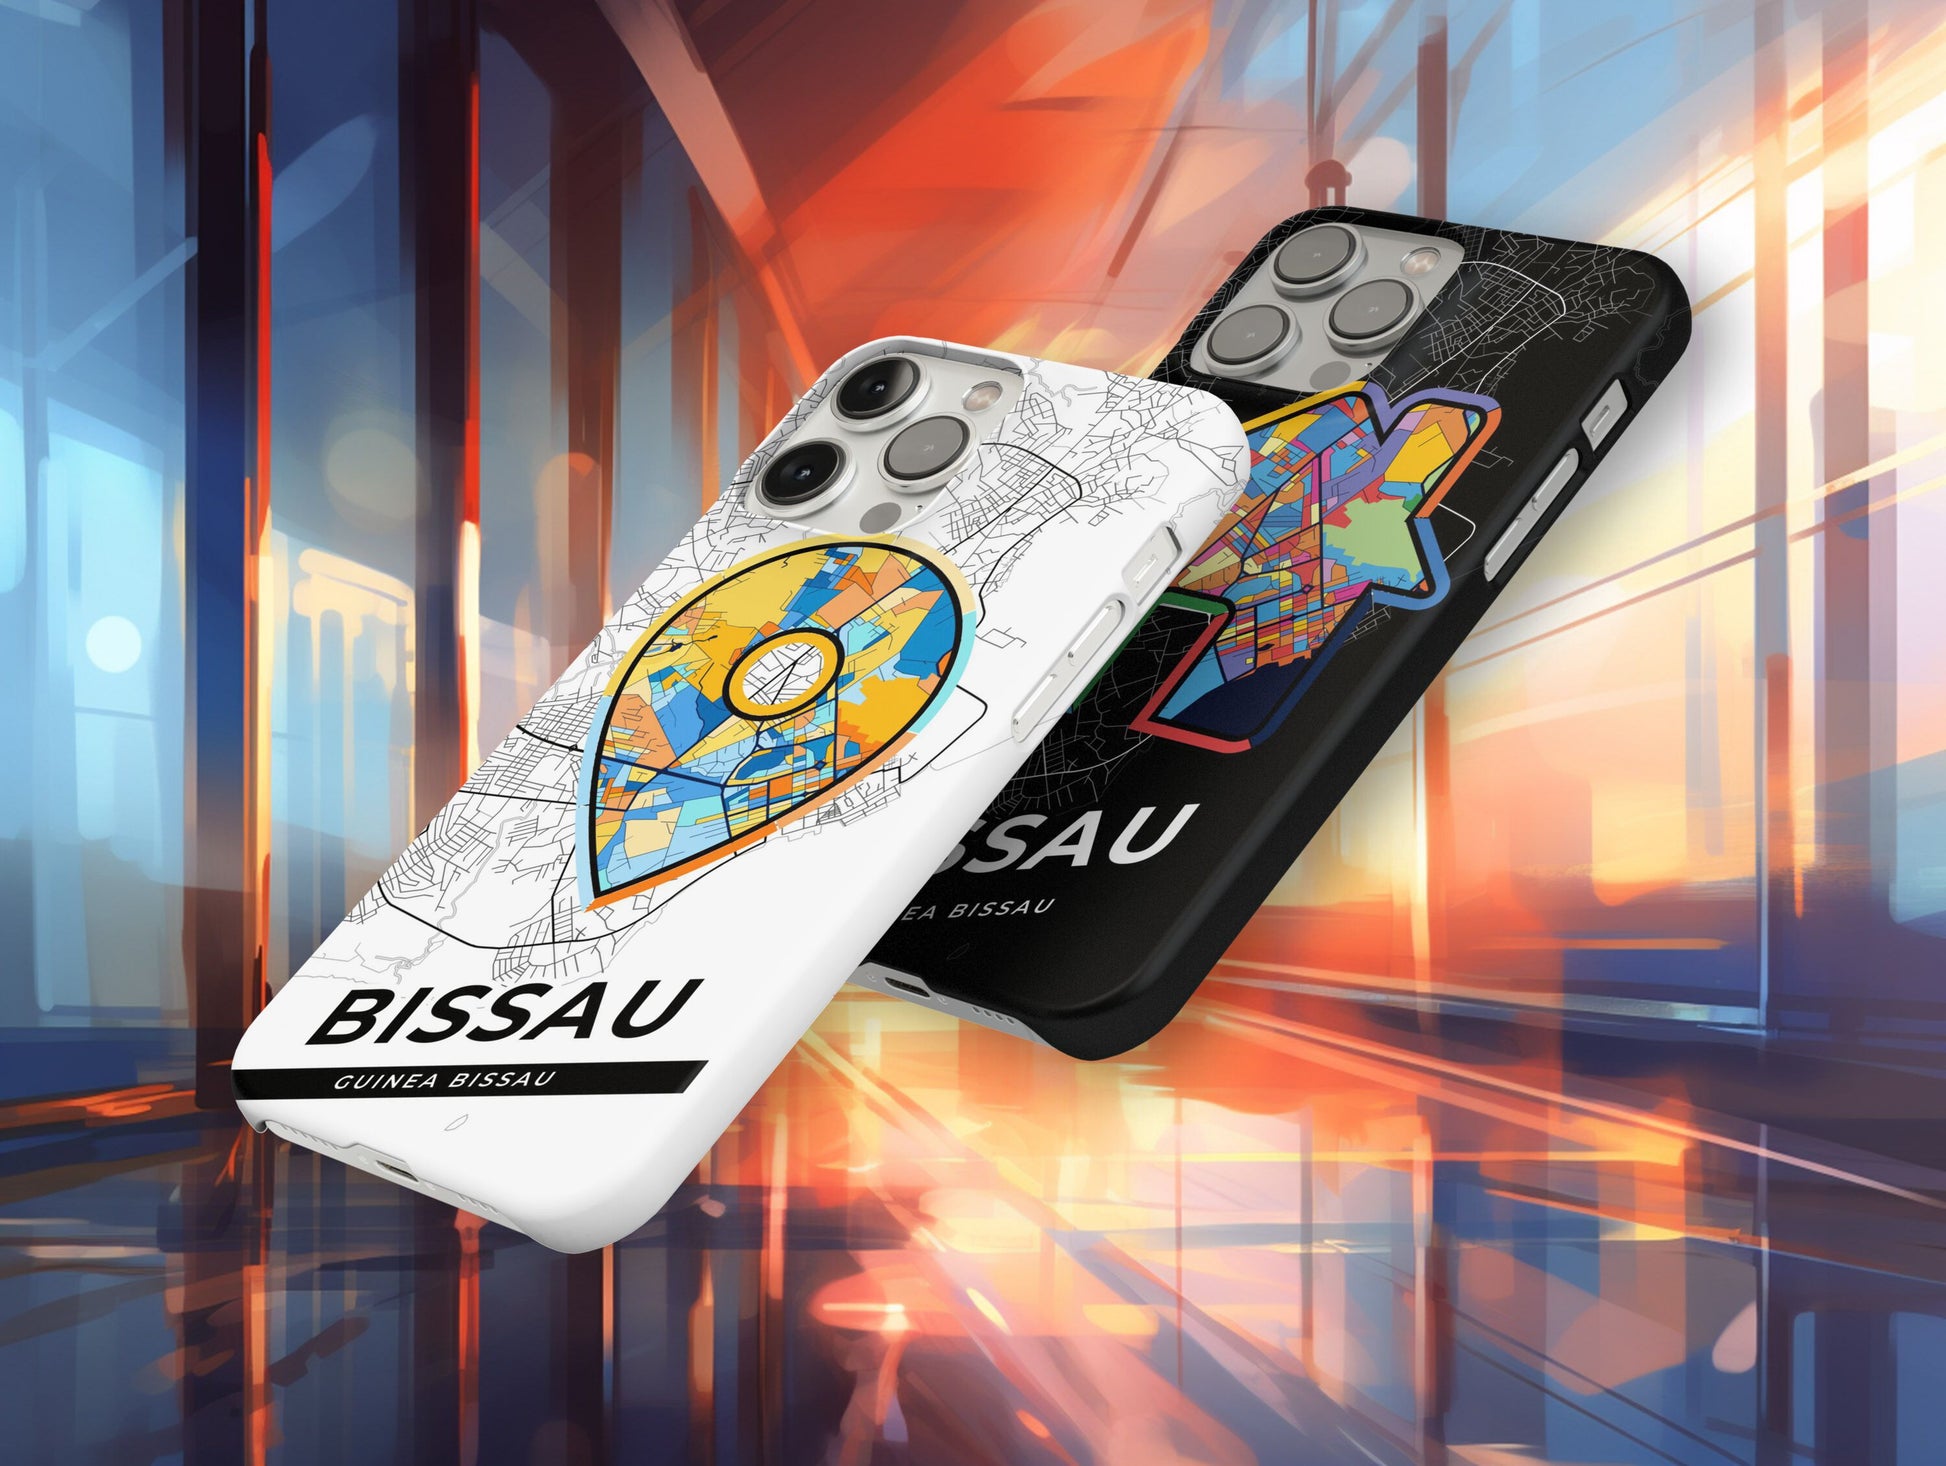 Bissau Guinea Bissau slim phone case with colorful icon. Birthday, wedding or housewarming gift. Couple match cases.